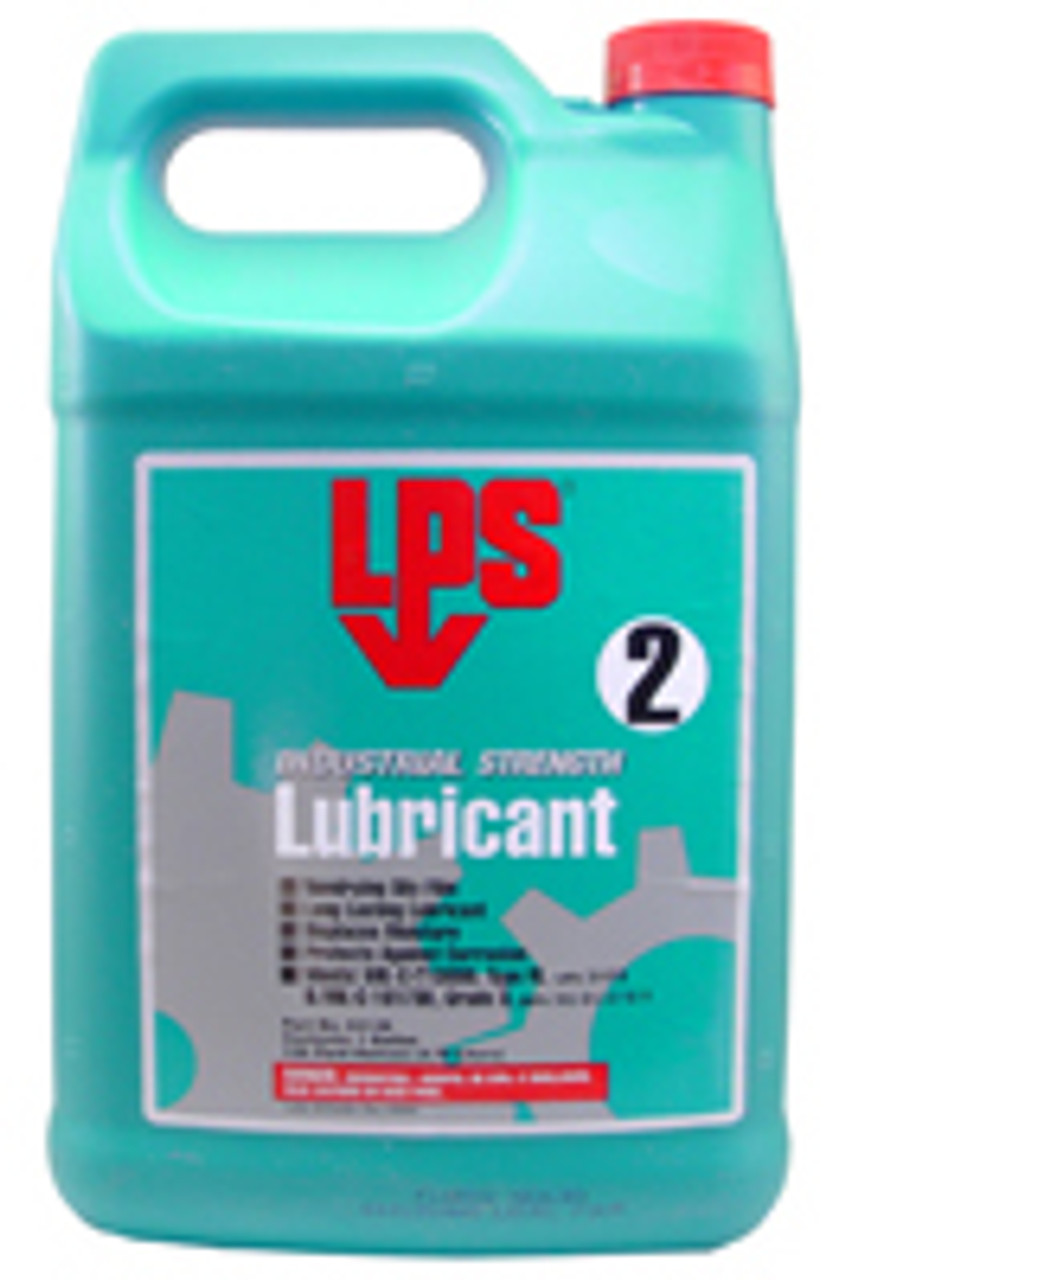 Food Grade Silicone Spray 11.5 oz. (Noble Chemical Lubriquik)